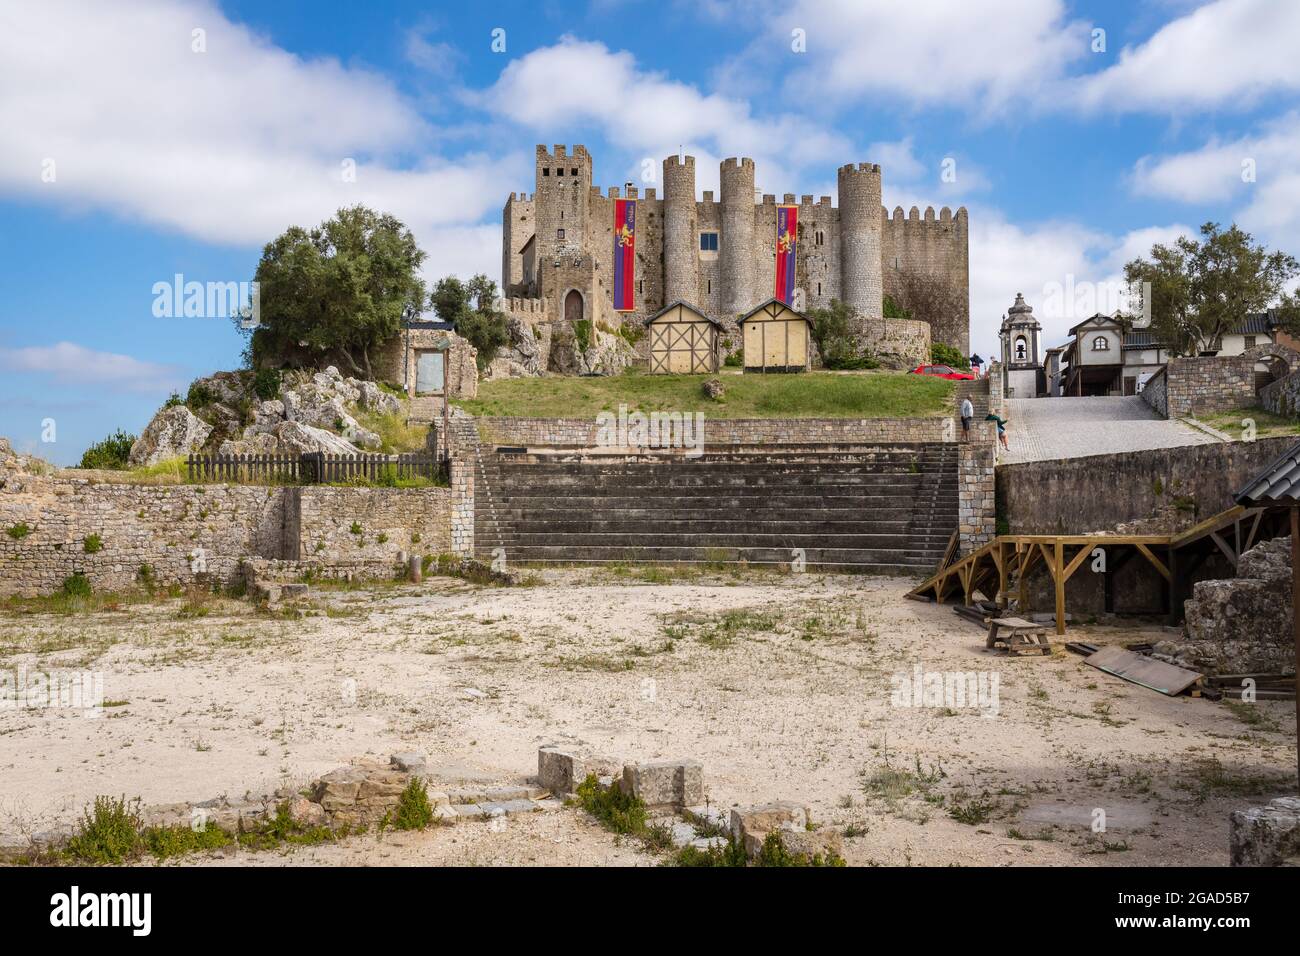 Obidos, Portugal - June 30, 2021: On top of of the hill in Obidos lies this beautiful castle Stock Photo